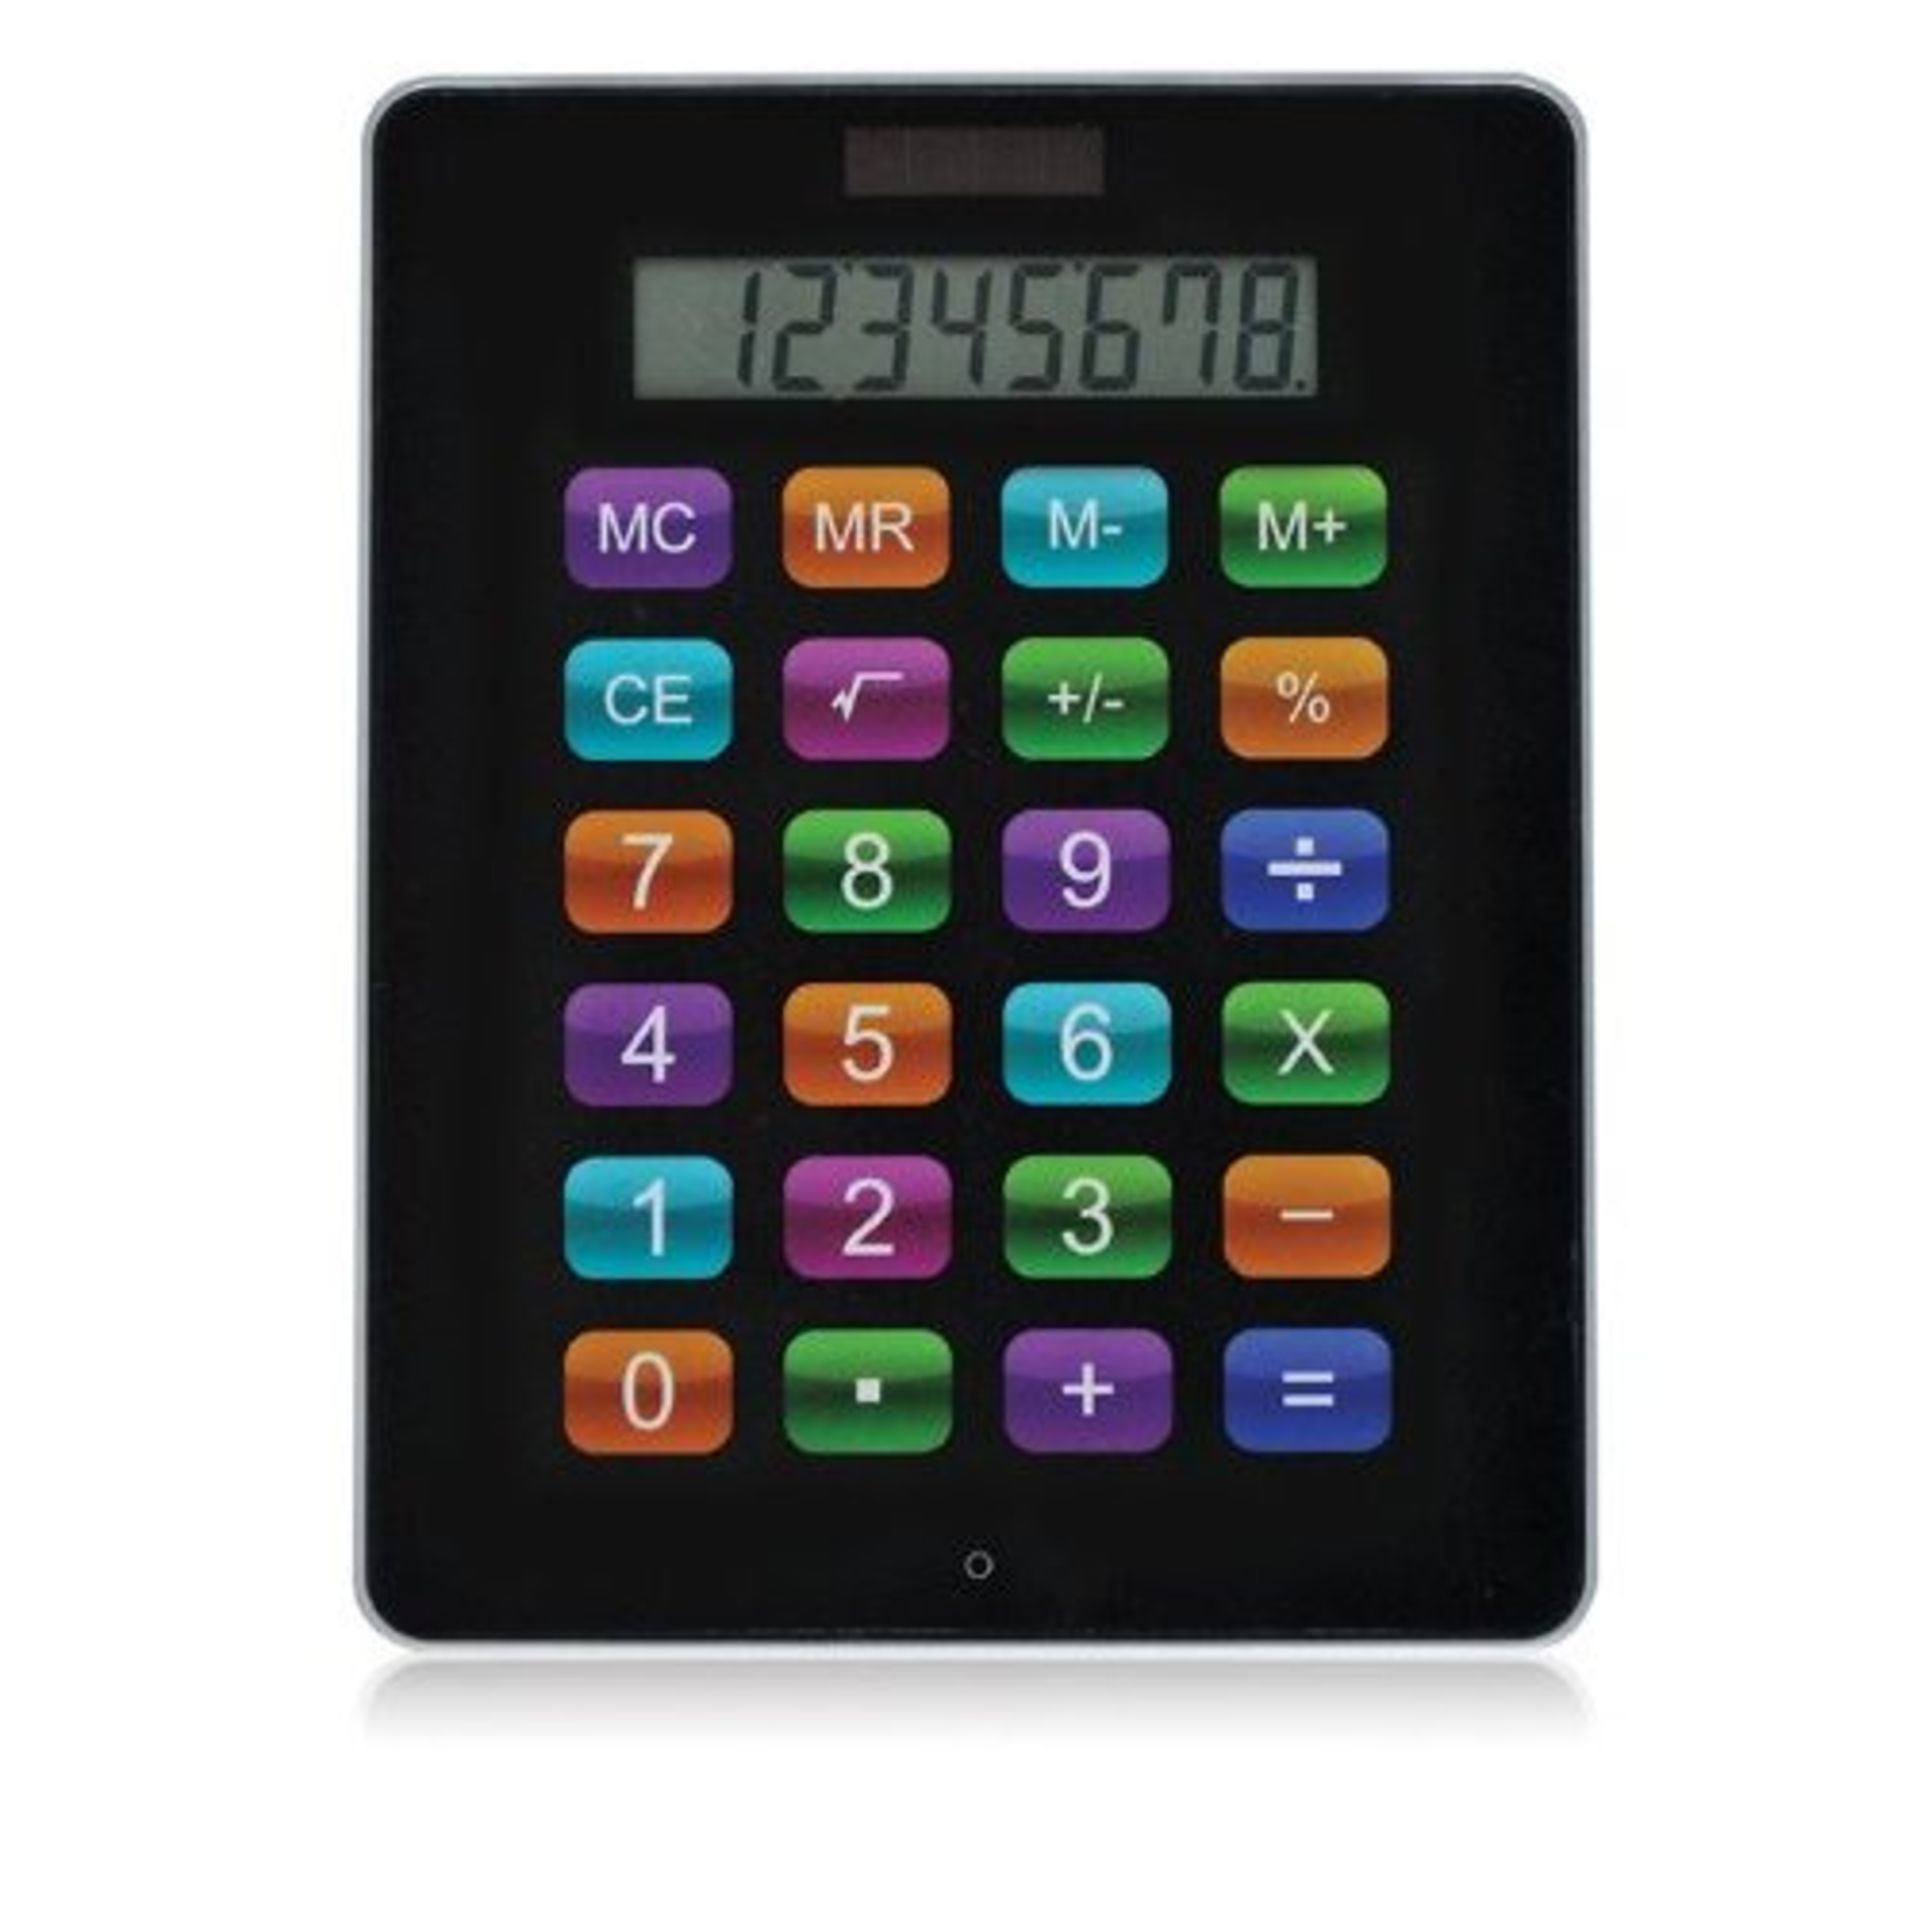 V *TRADE QTY* Brand New Ipad Calculator-Battery powered with solar backup X 3 YOUR BID PRICE TO BE